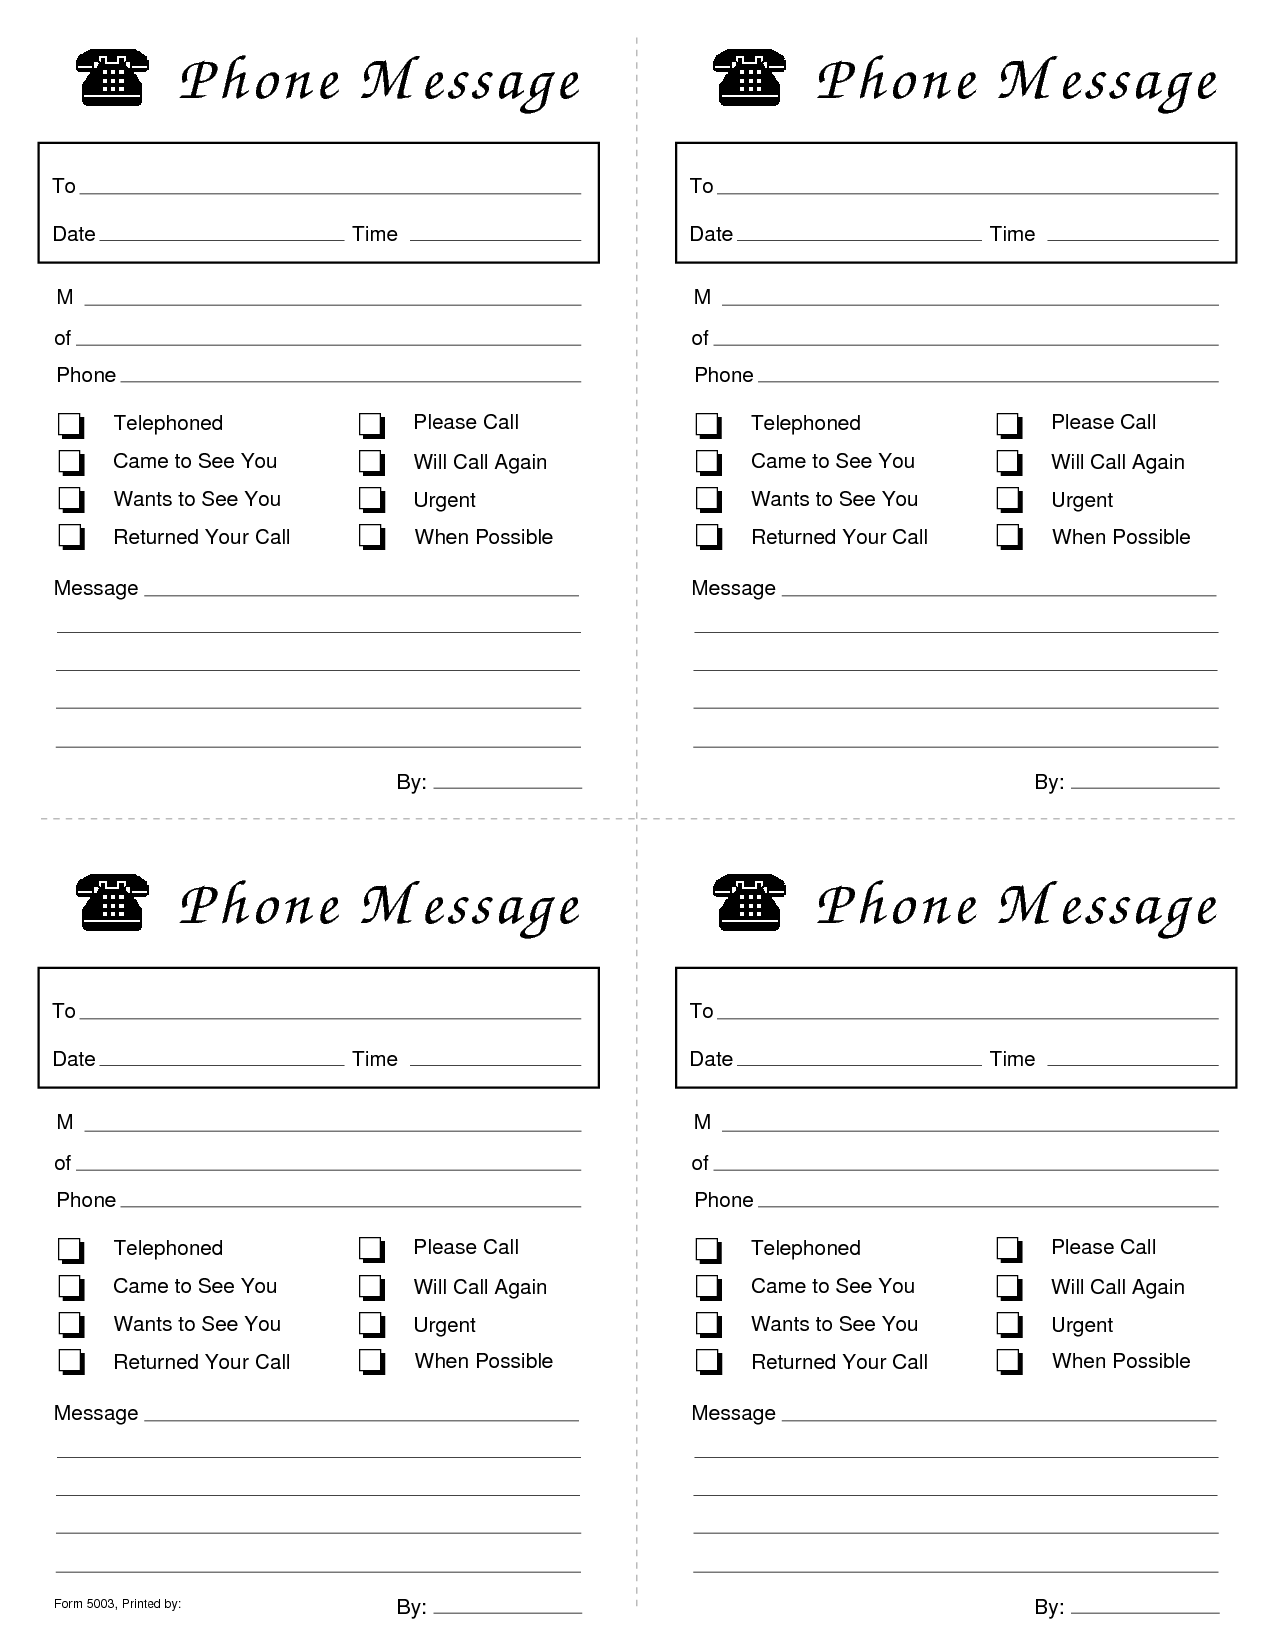 7-best-images-of-free-printable-phone-message-sheets-printable-phone